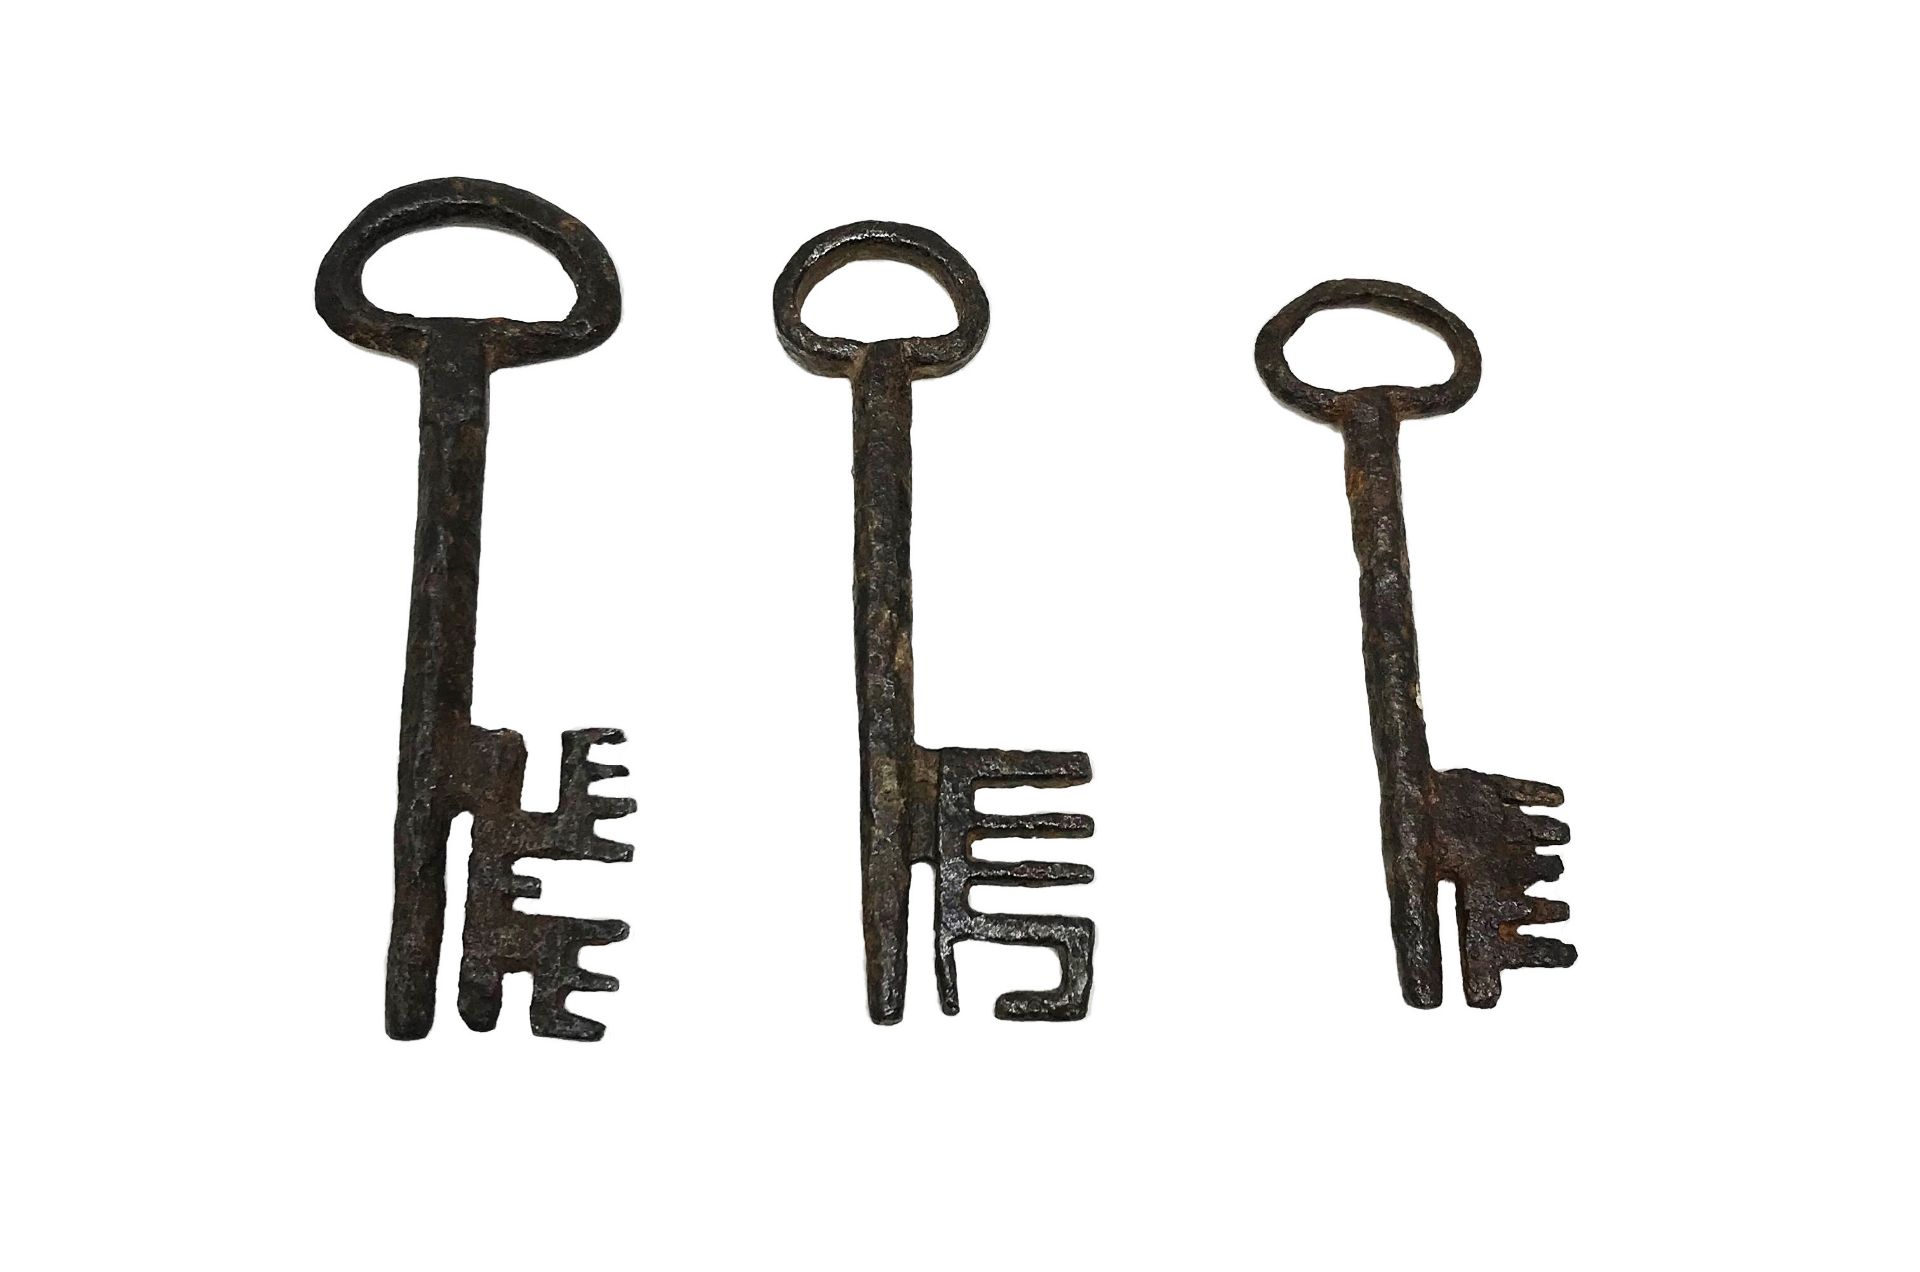 Three gothic keys9,06 - 8, 46 - 7,63 cm. Part of the chapter "From the Time of the Cathedrals". - Image 2 of 2